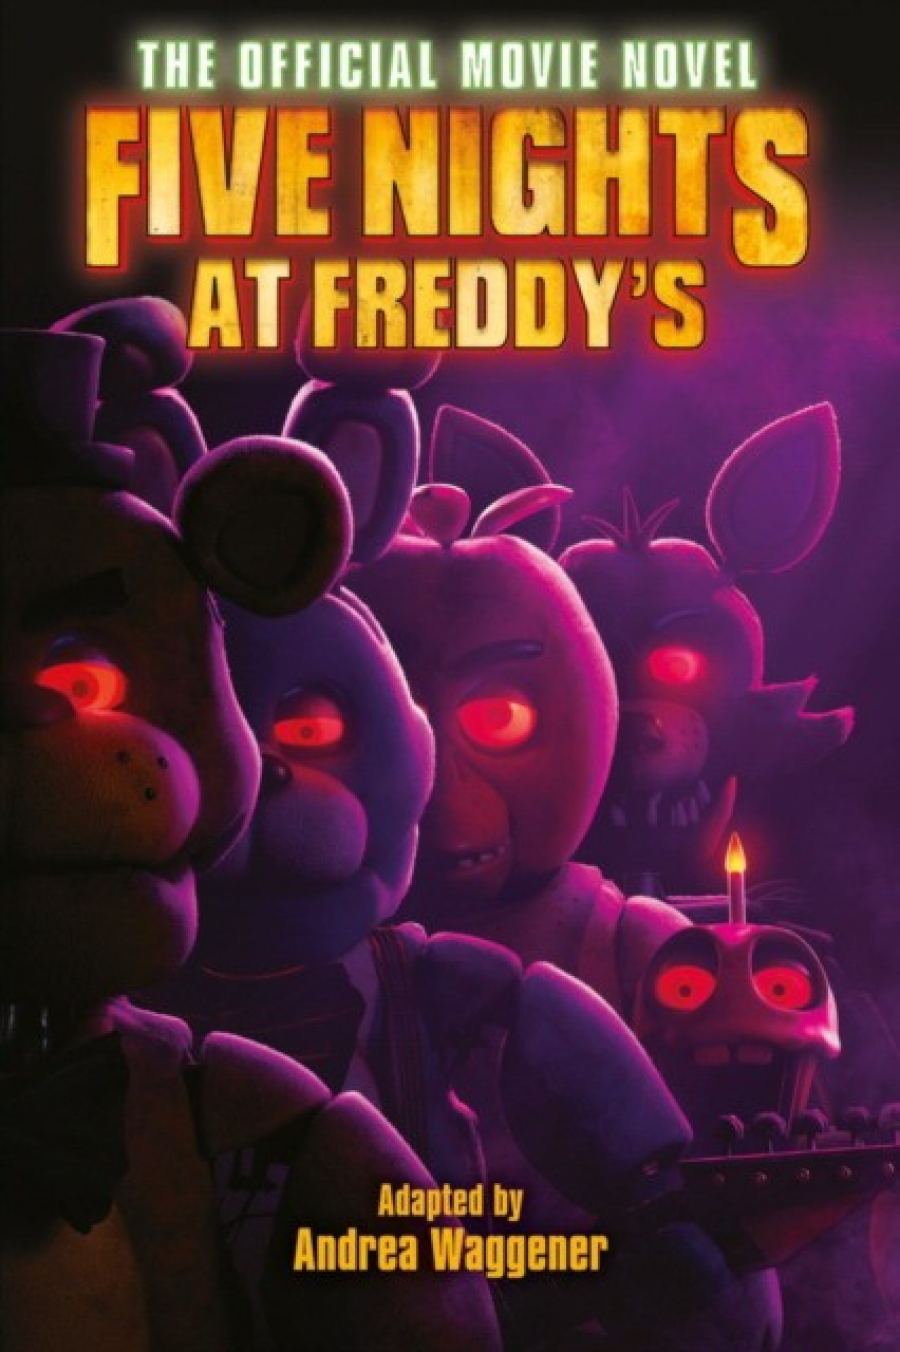 Scott, Cawthon Five nights at freddy's: the official movie novel 